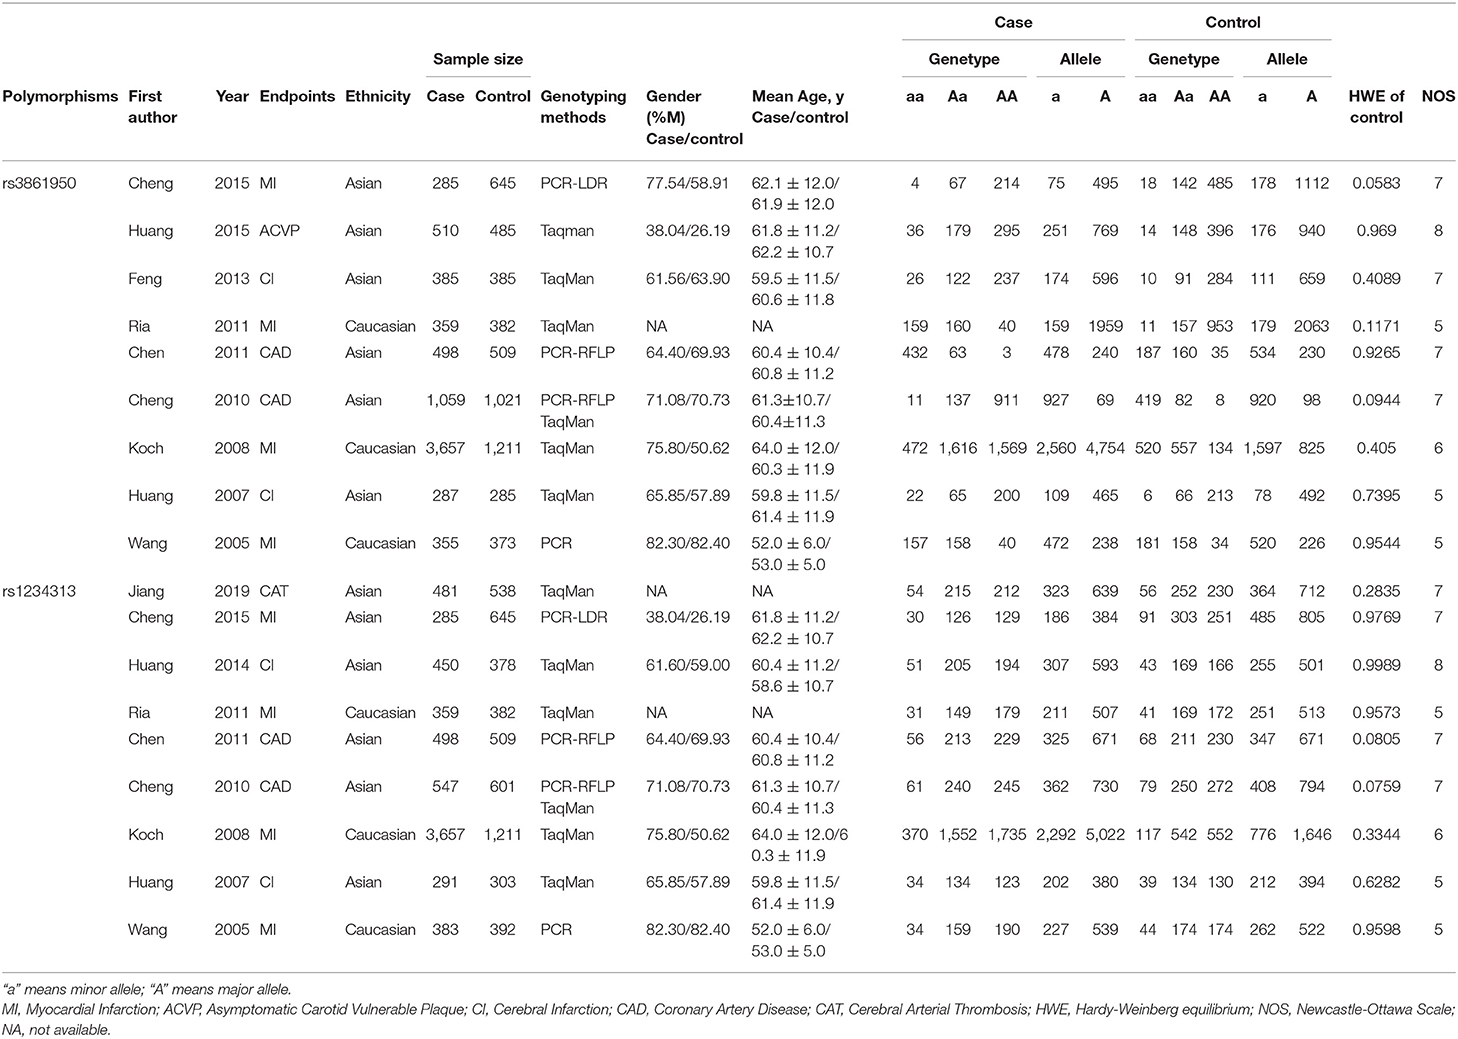 Frontiers | A Meta-Analysis on the Association Between TNFSF4 